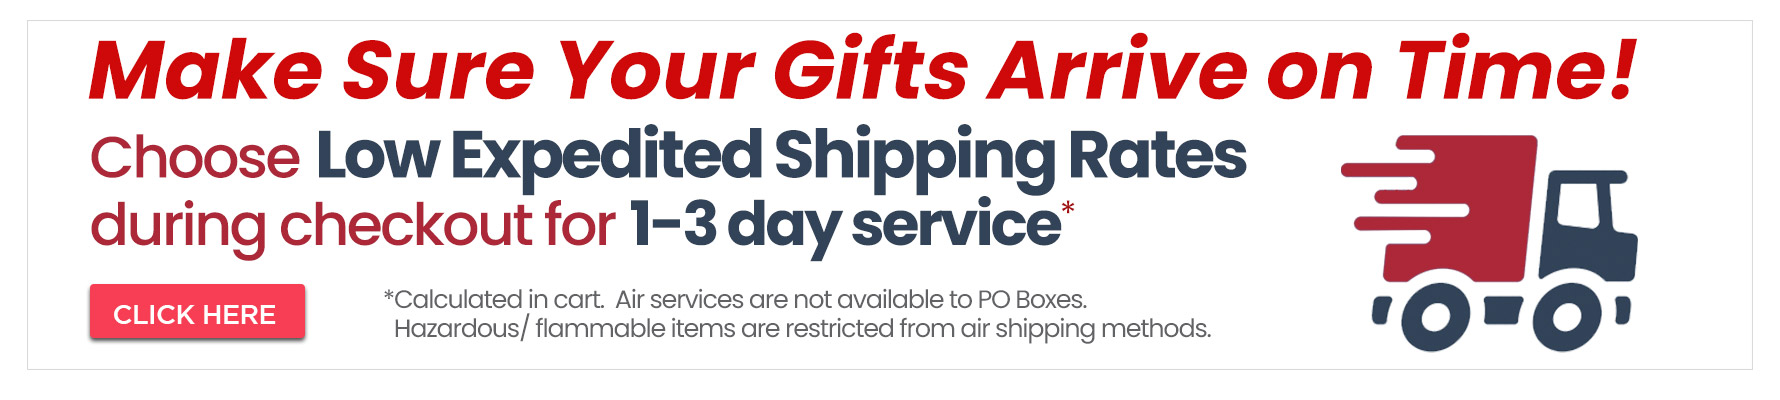 Shop NOW to Get Gifts Sent On Time! 